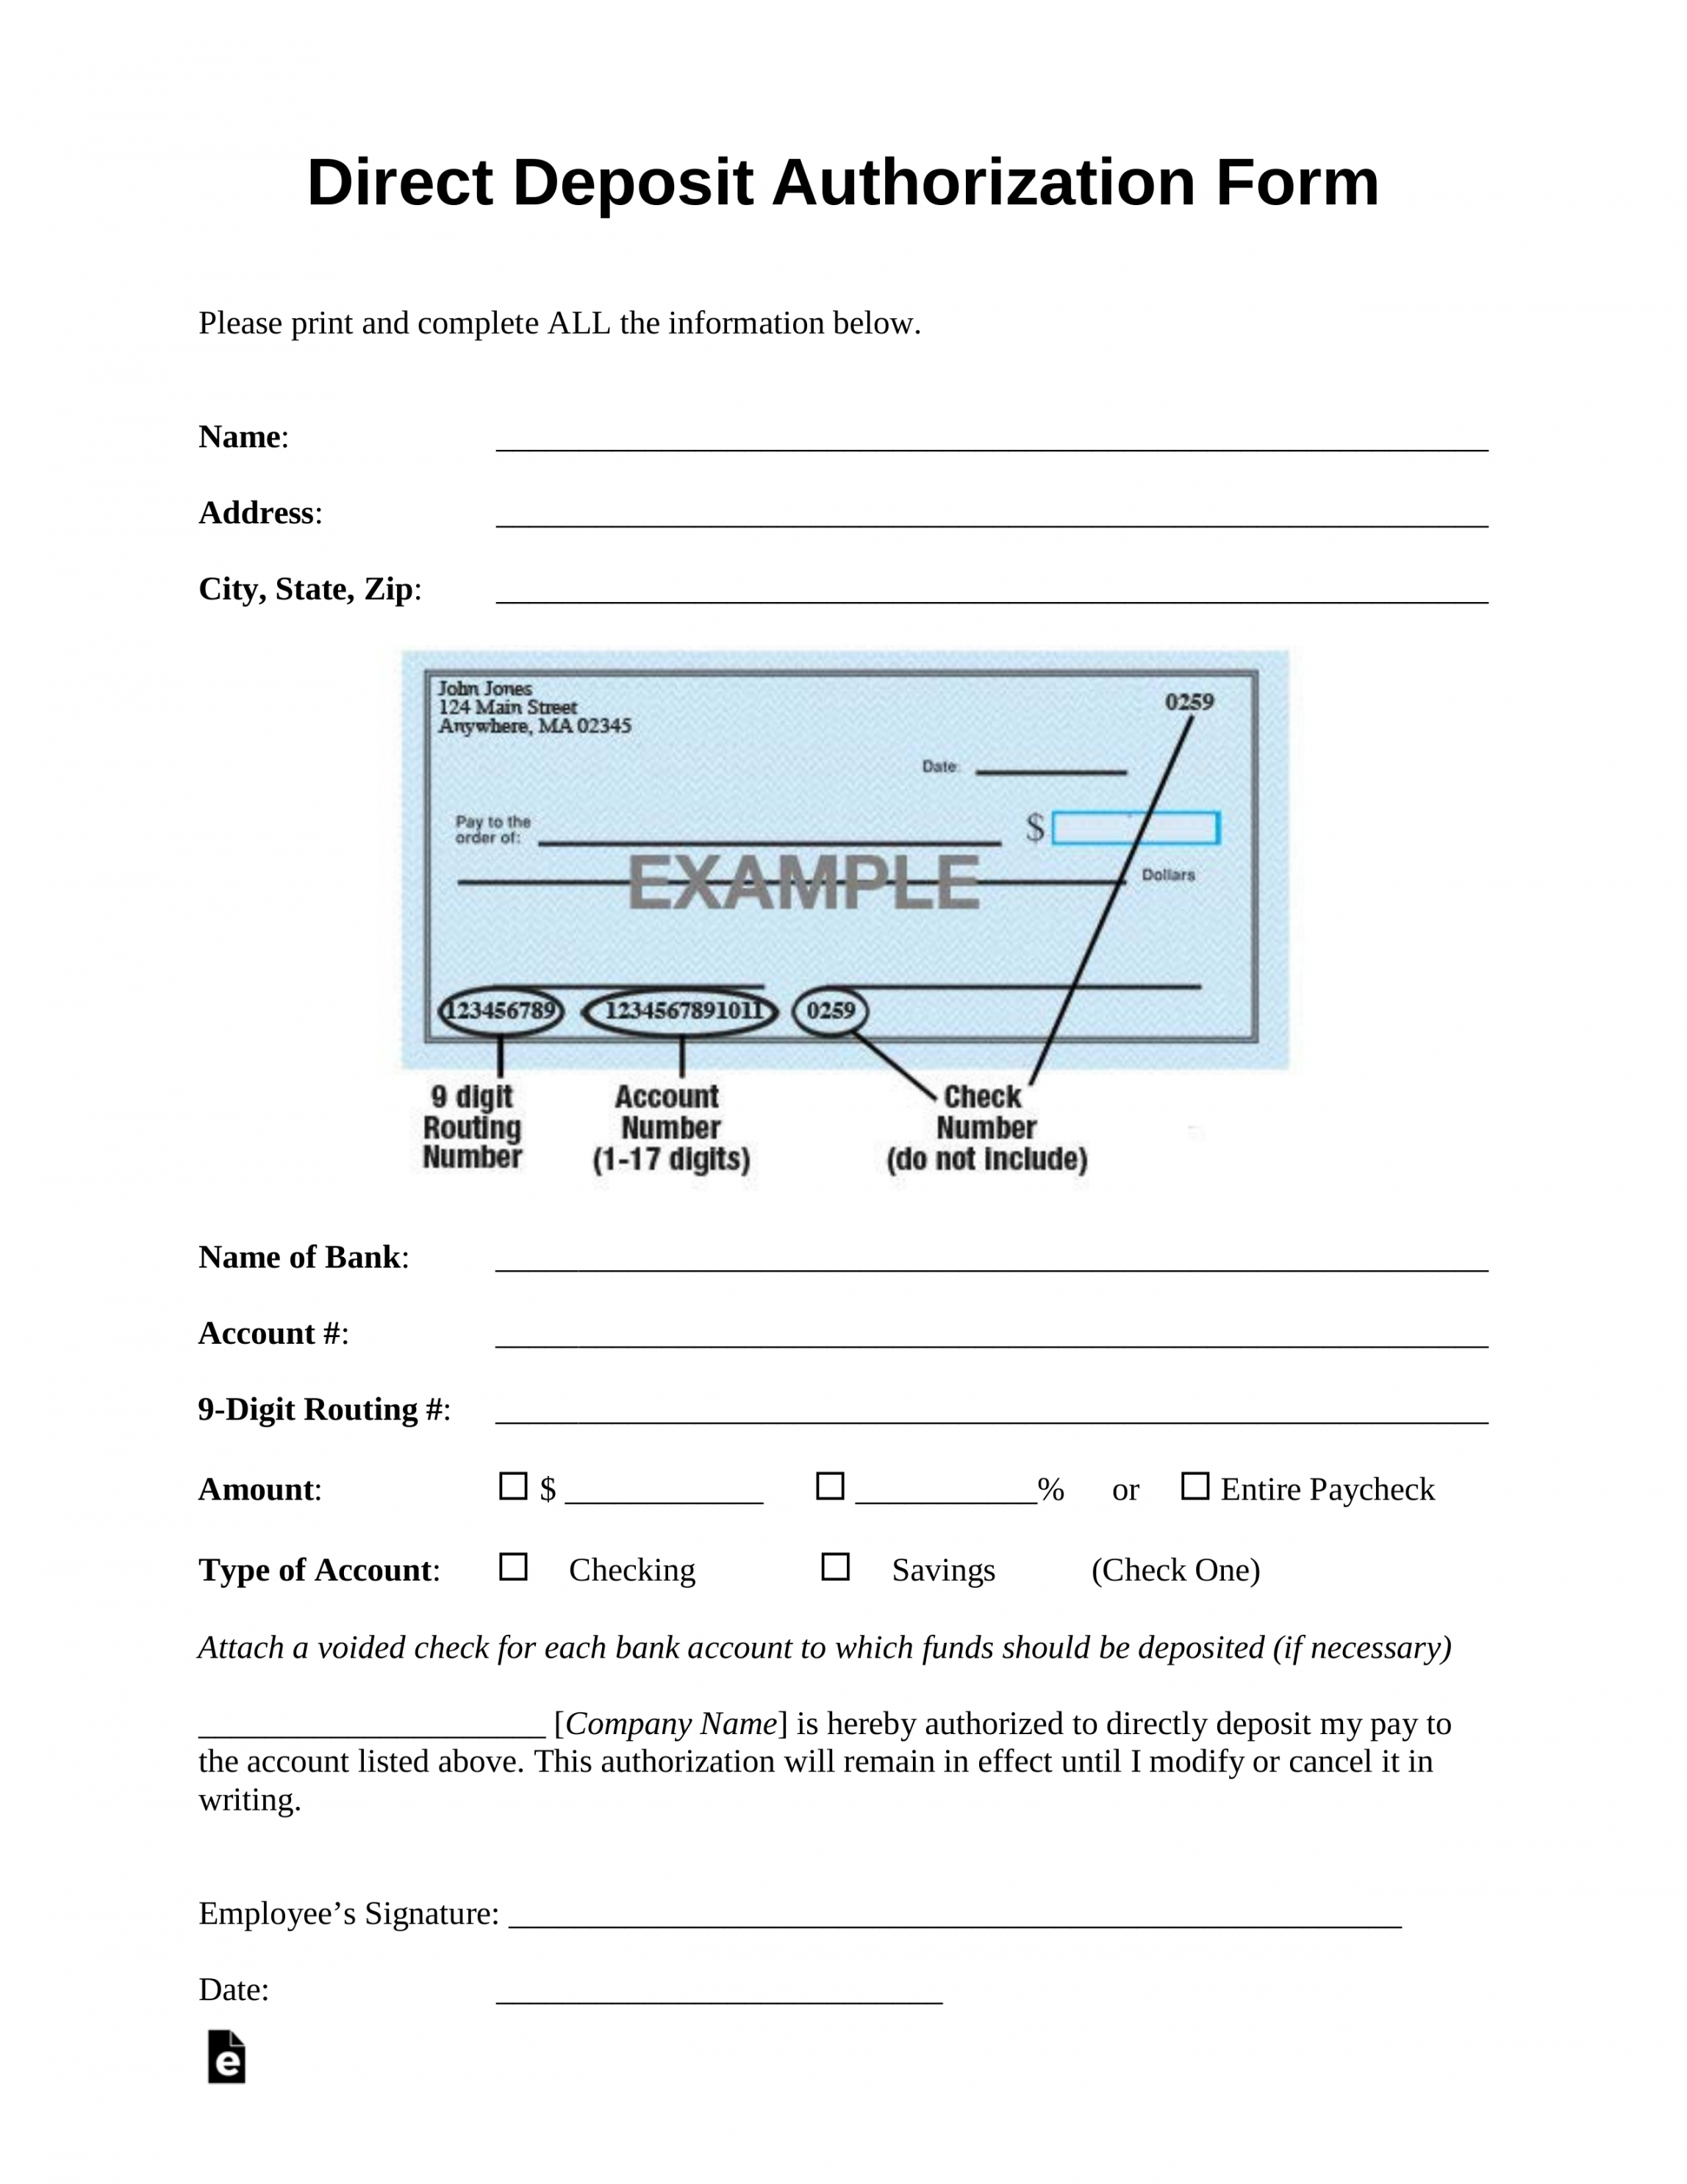 free direct deposit authorization forms  pdf  word direct deposit agreement form template sample